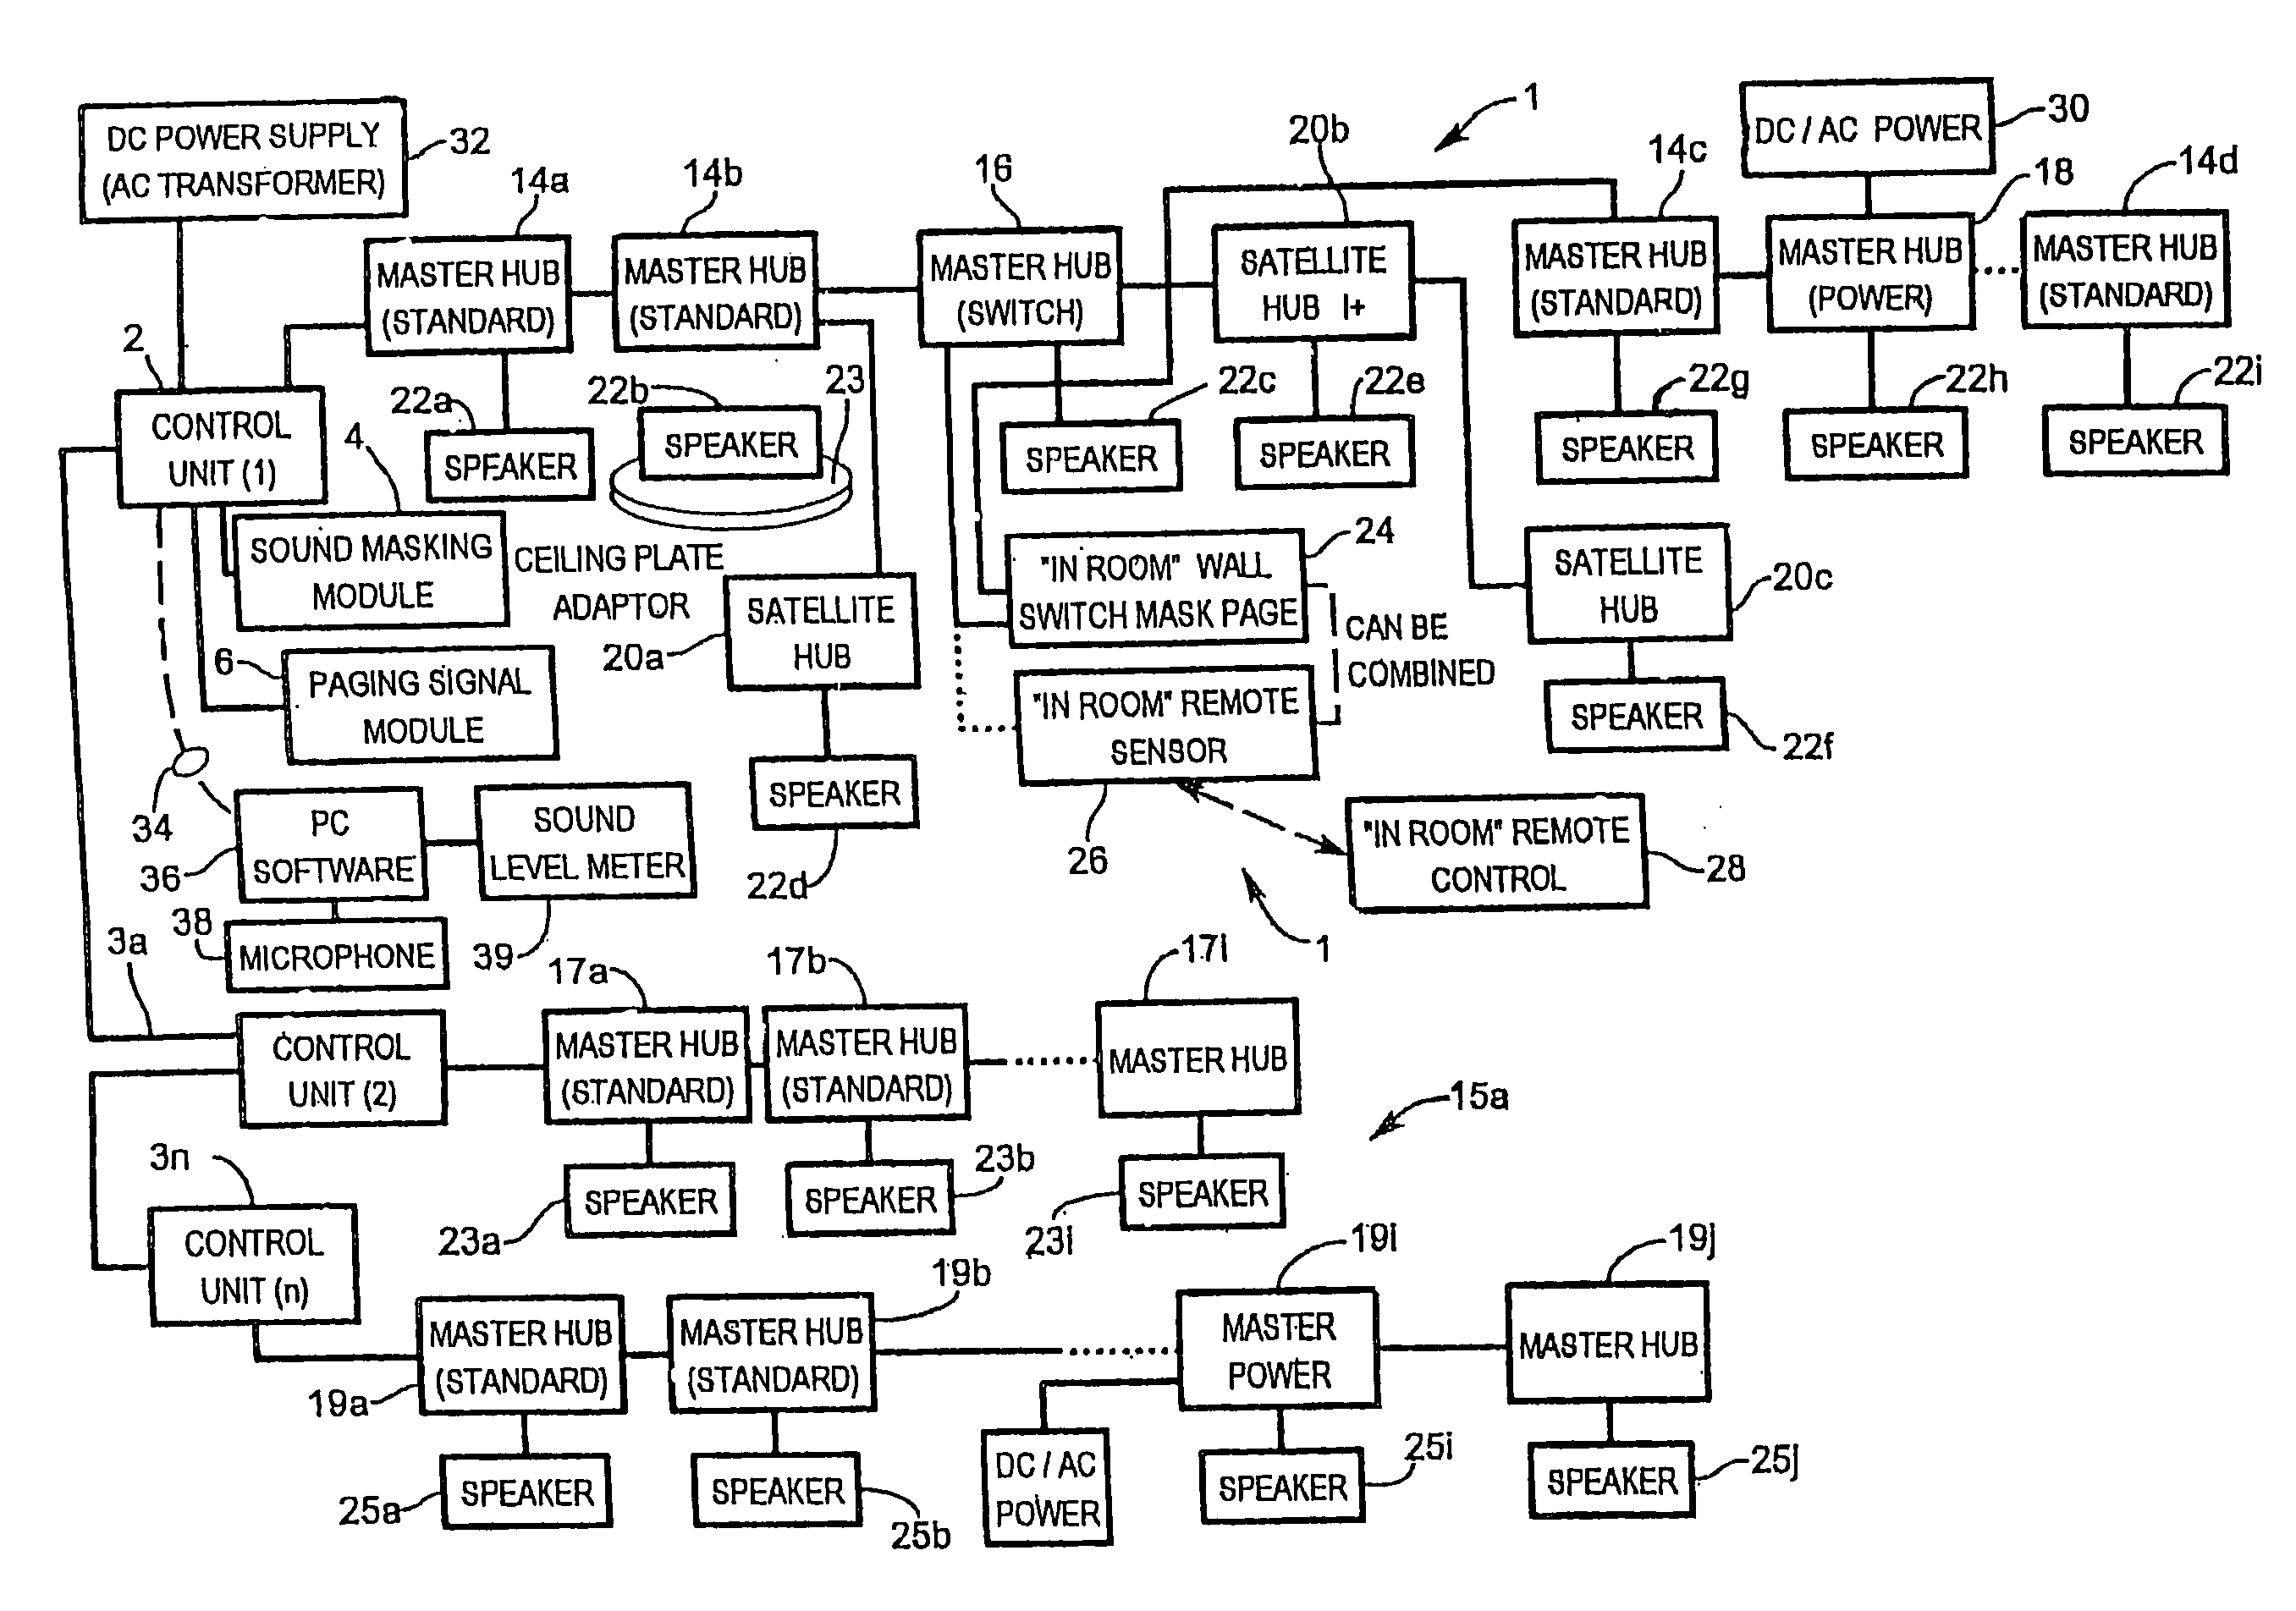 Networked sound masking system with centralized sound masking generation